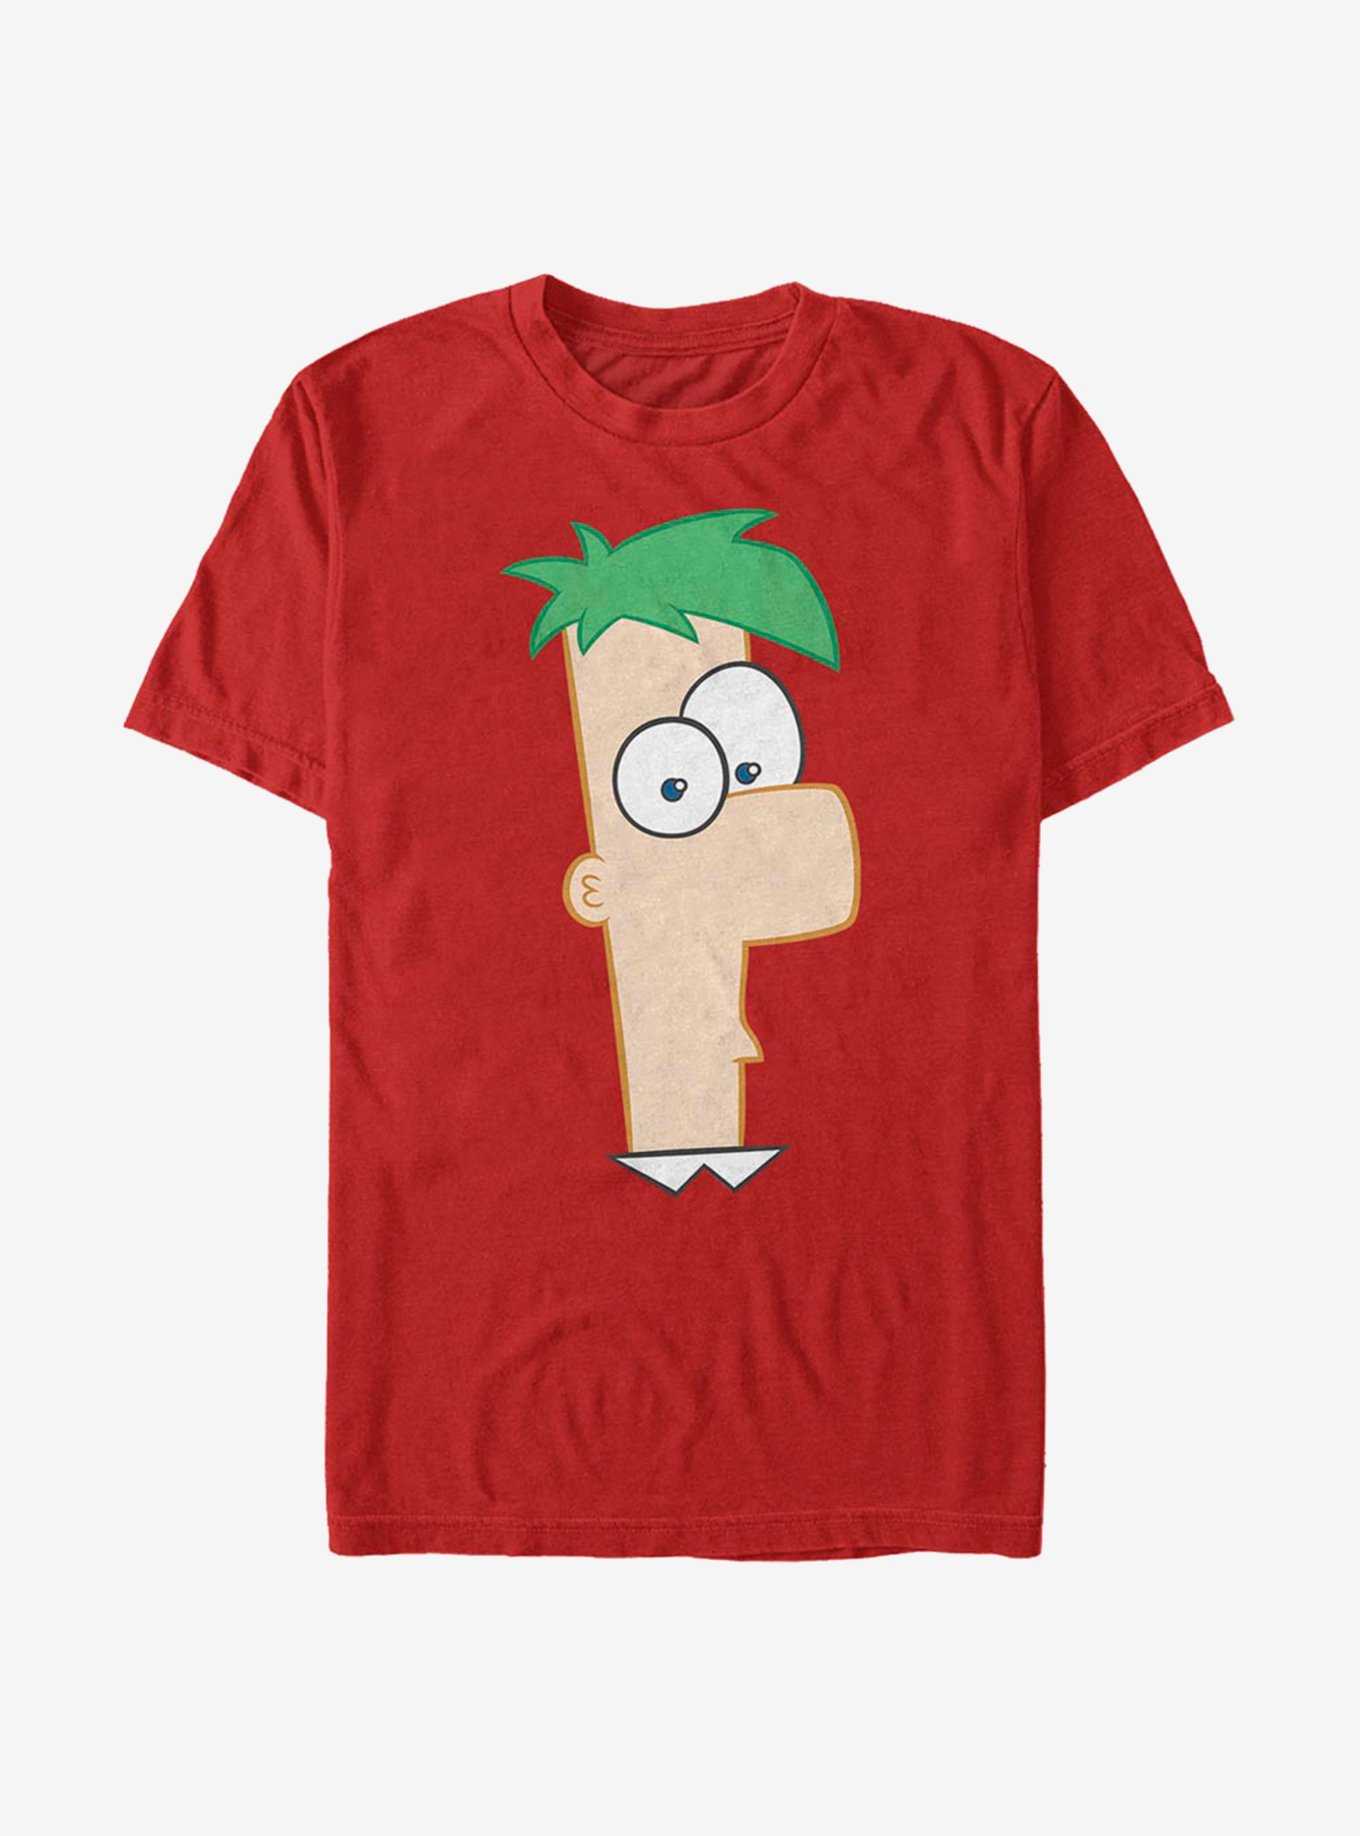 Disney Phineas And Ferb Large Ferb T-Shirt, , hi-res